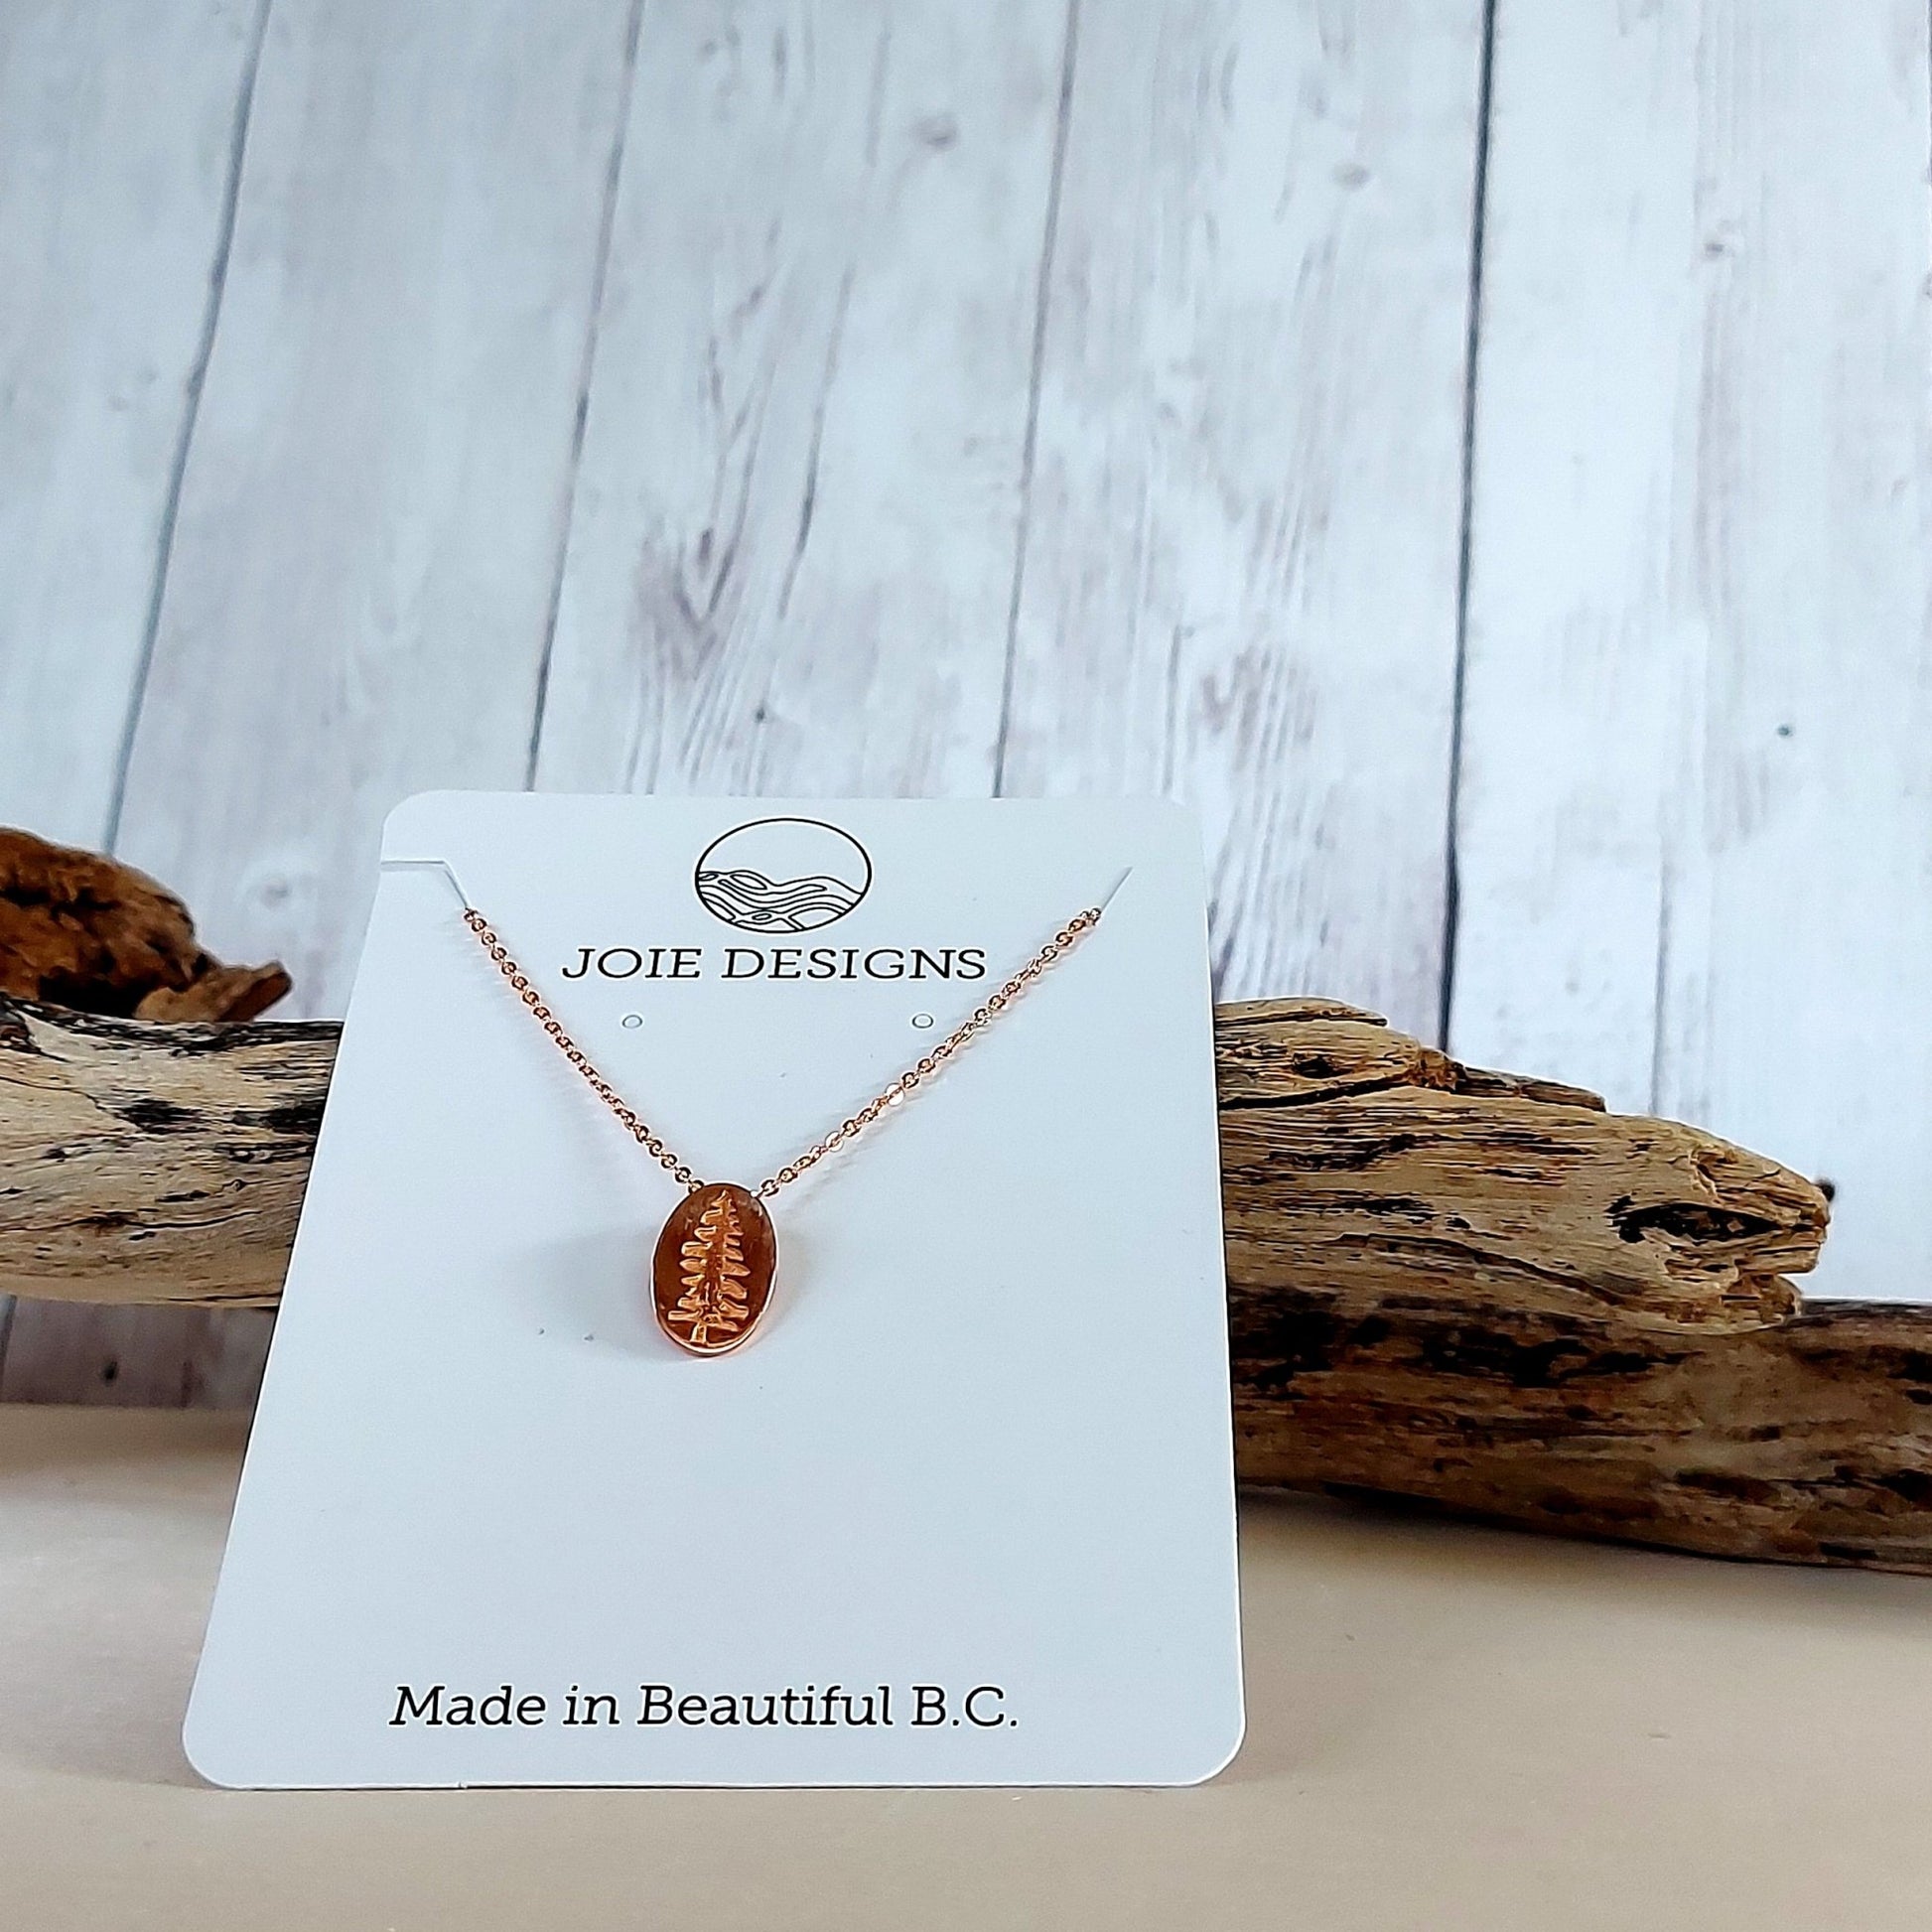 18k rose gold plated Sitka Tree embossed into Oval Pendant Necklace on a jewelry card and wood background